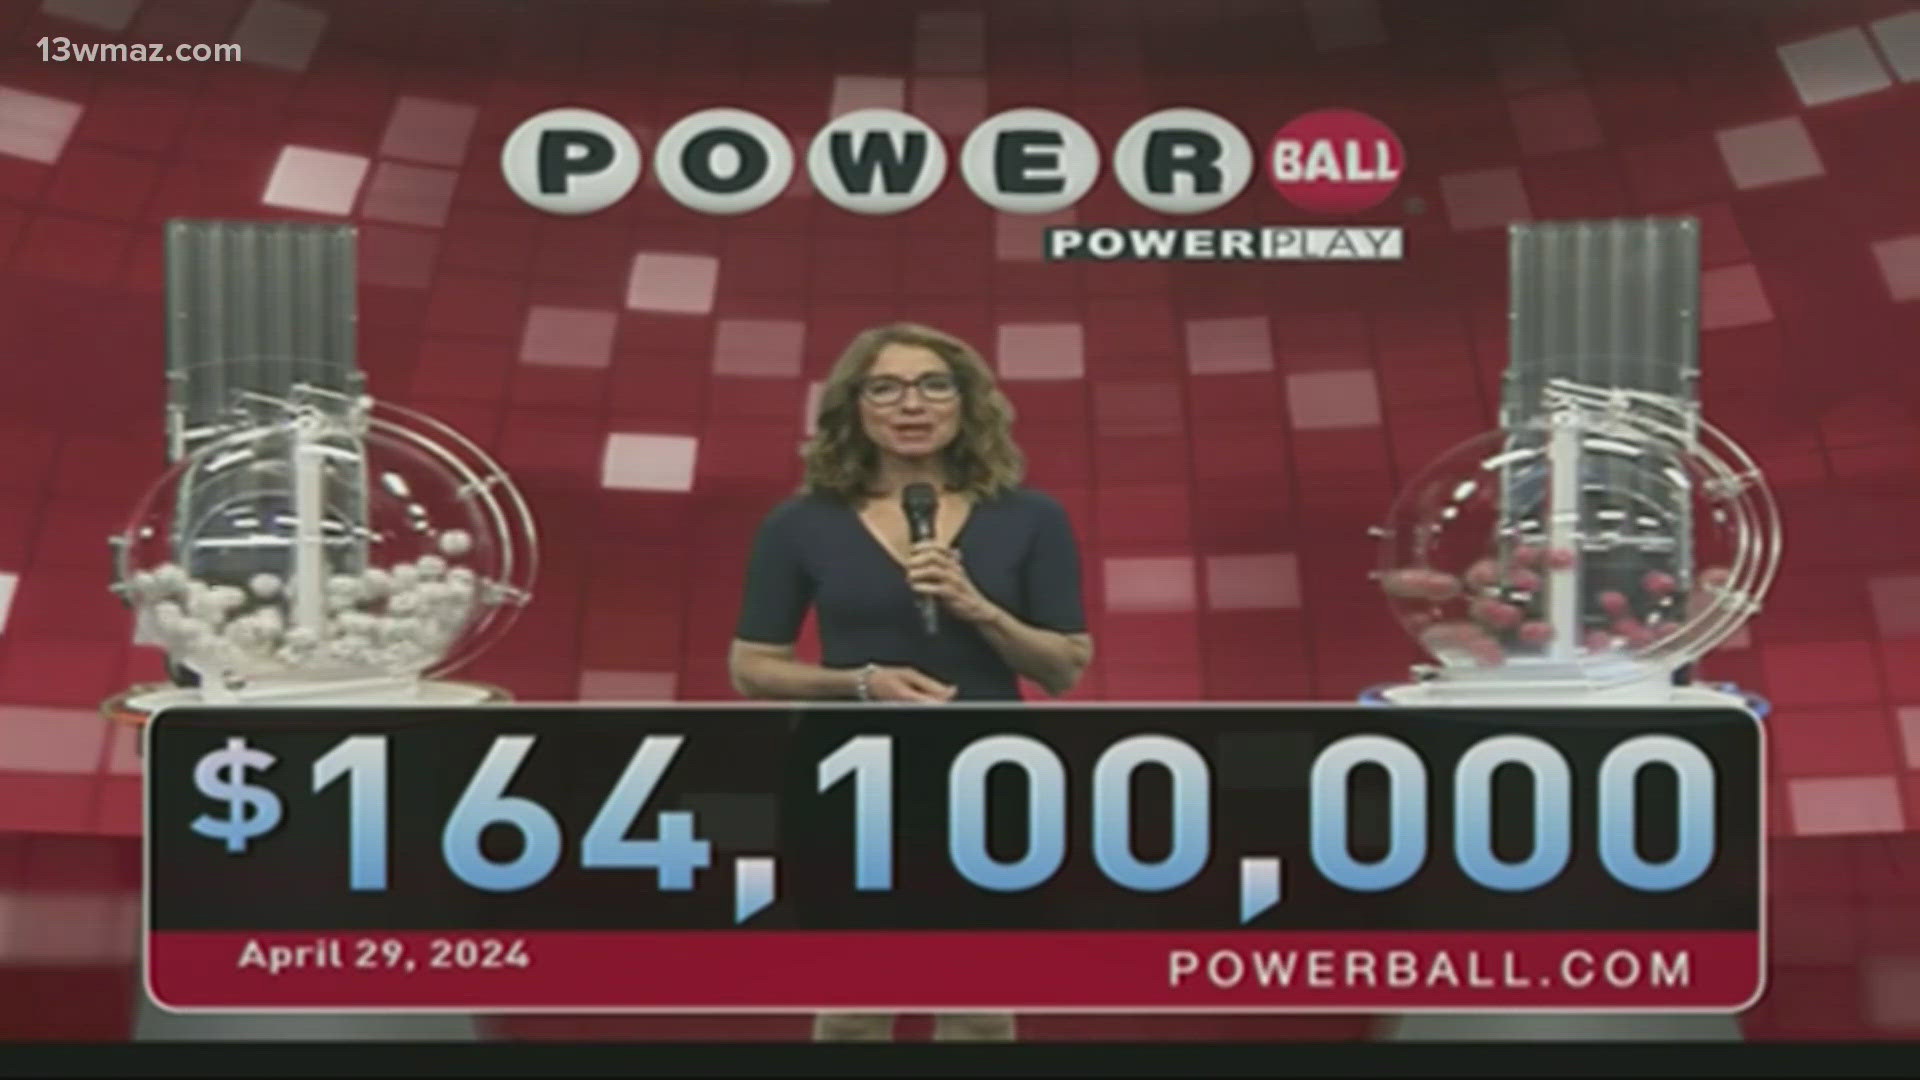 Here are your winning Powerball Numbers for April 29, 2024's $164.1 million jackpot. What would you do with that kind of money?